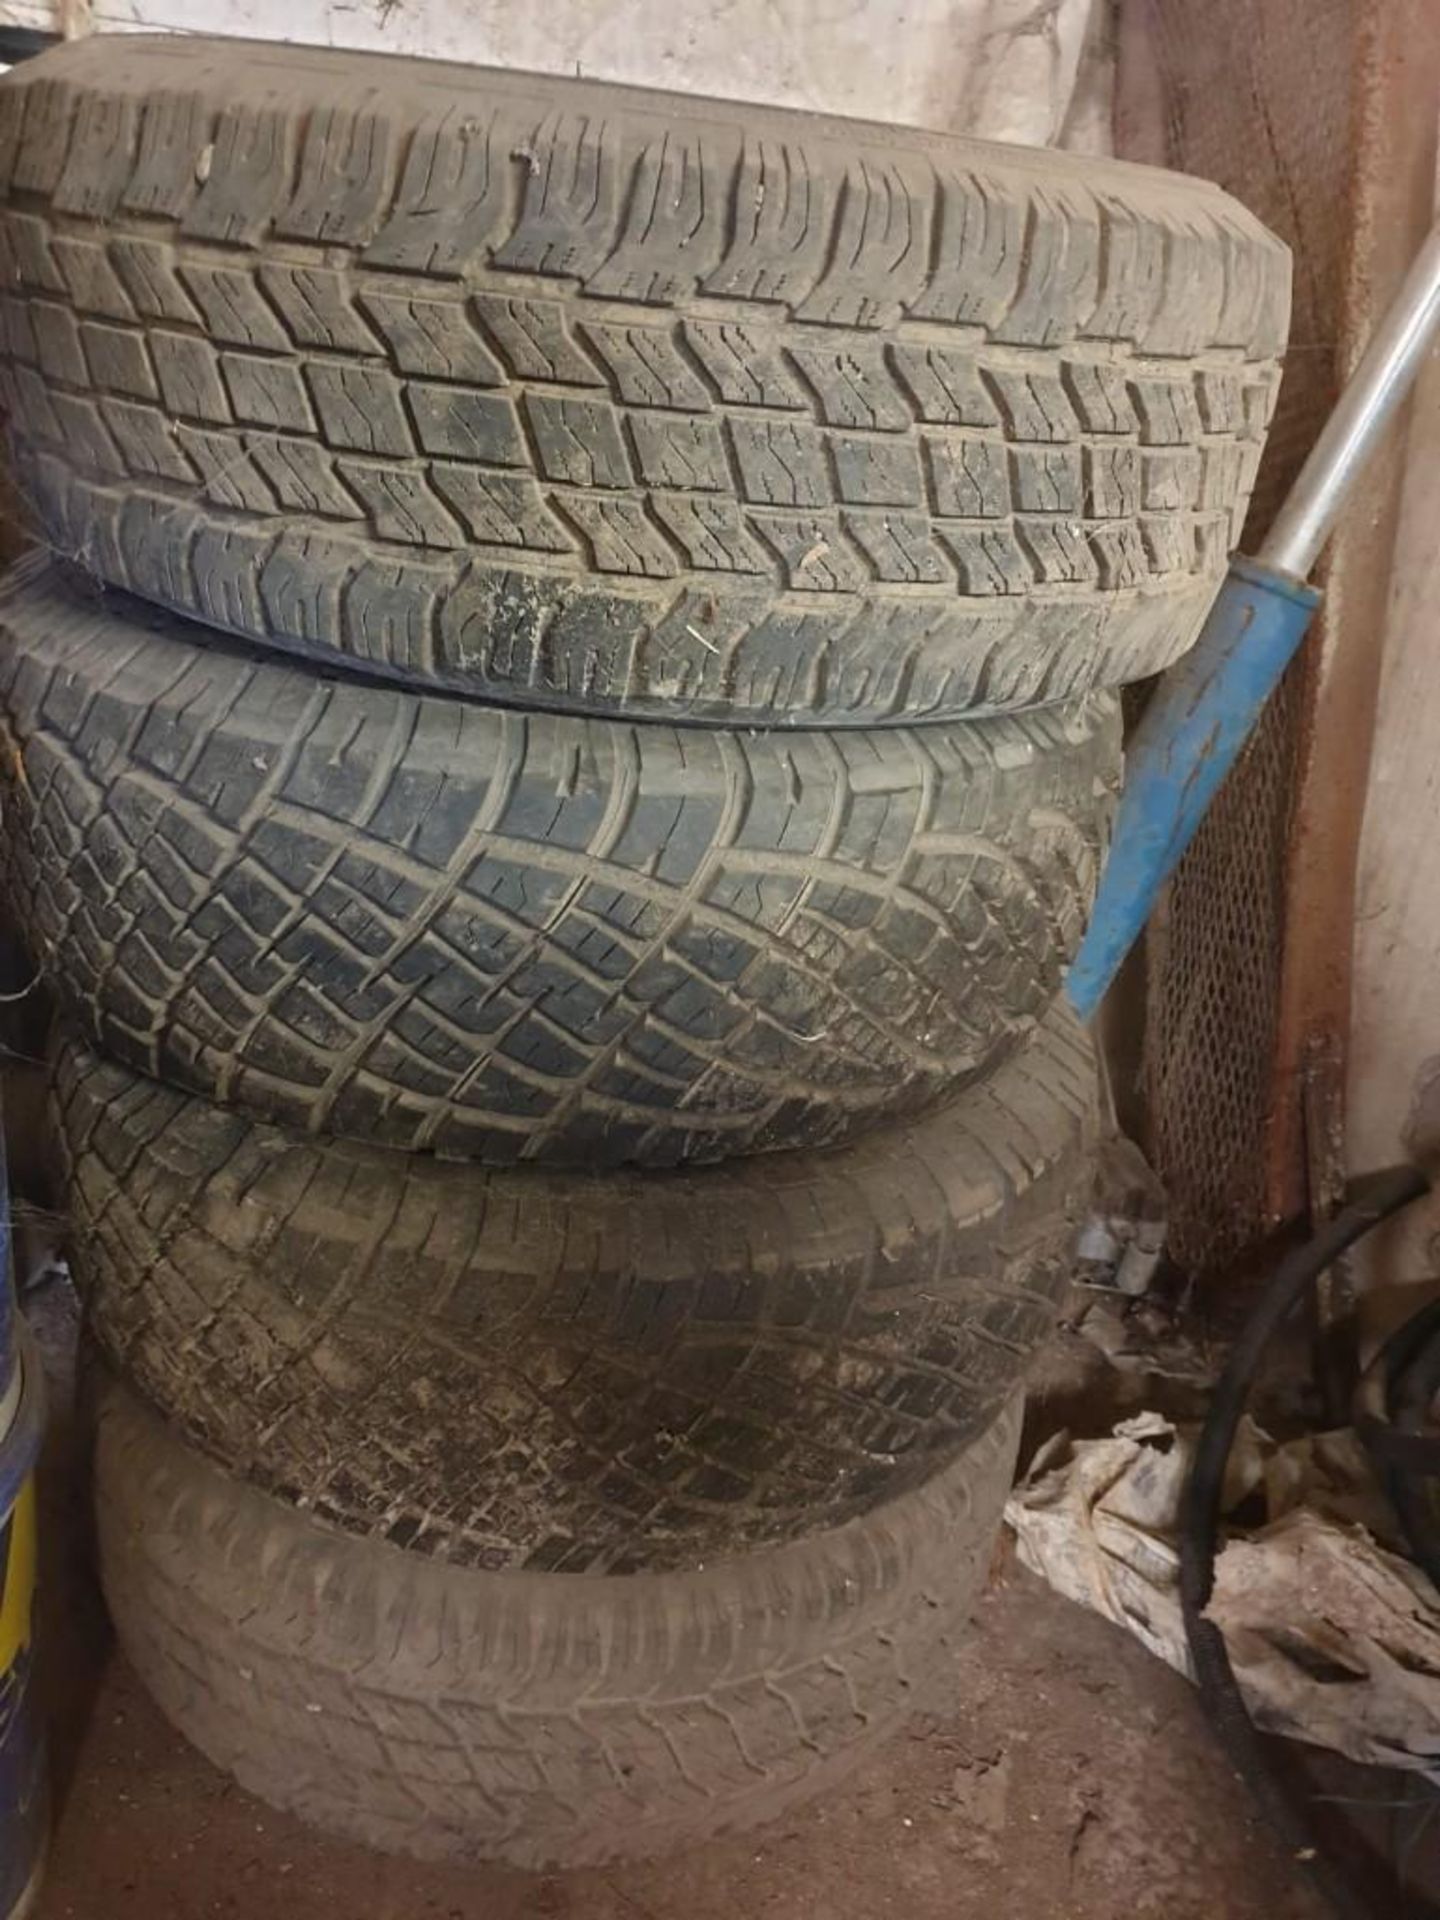 4 x Land Rover Wheels & Tyres 255/65R16 - Image 2 of 2